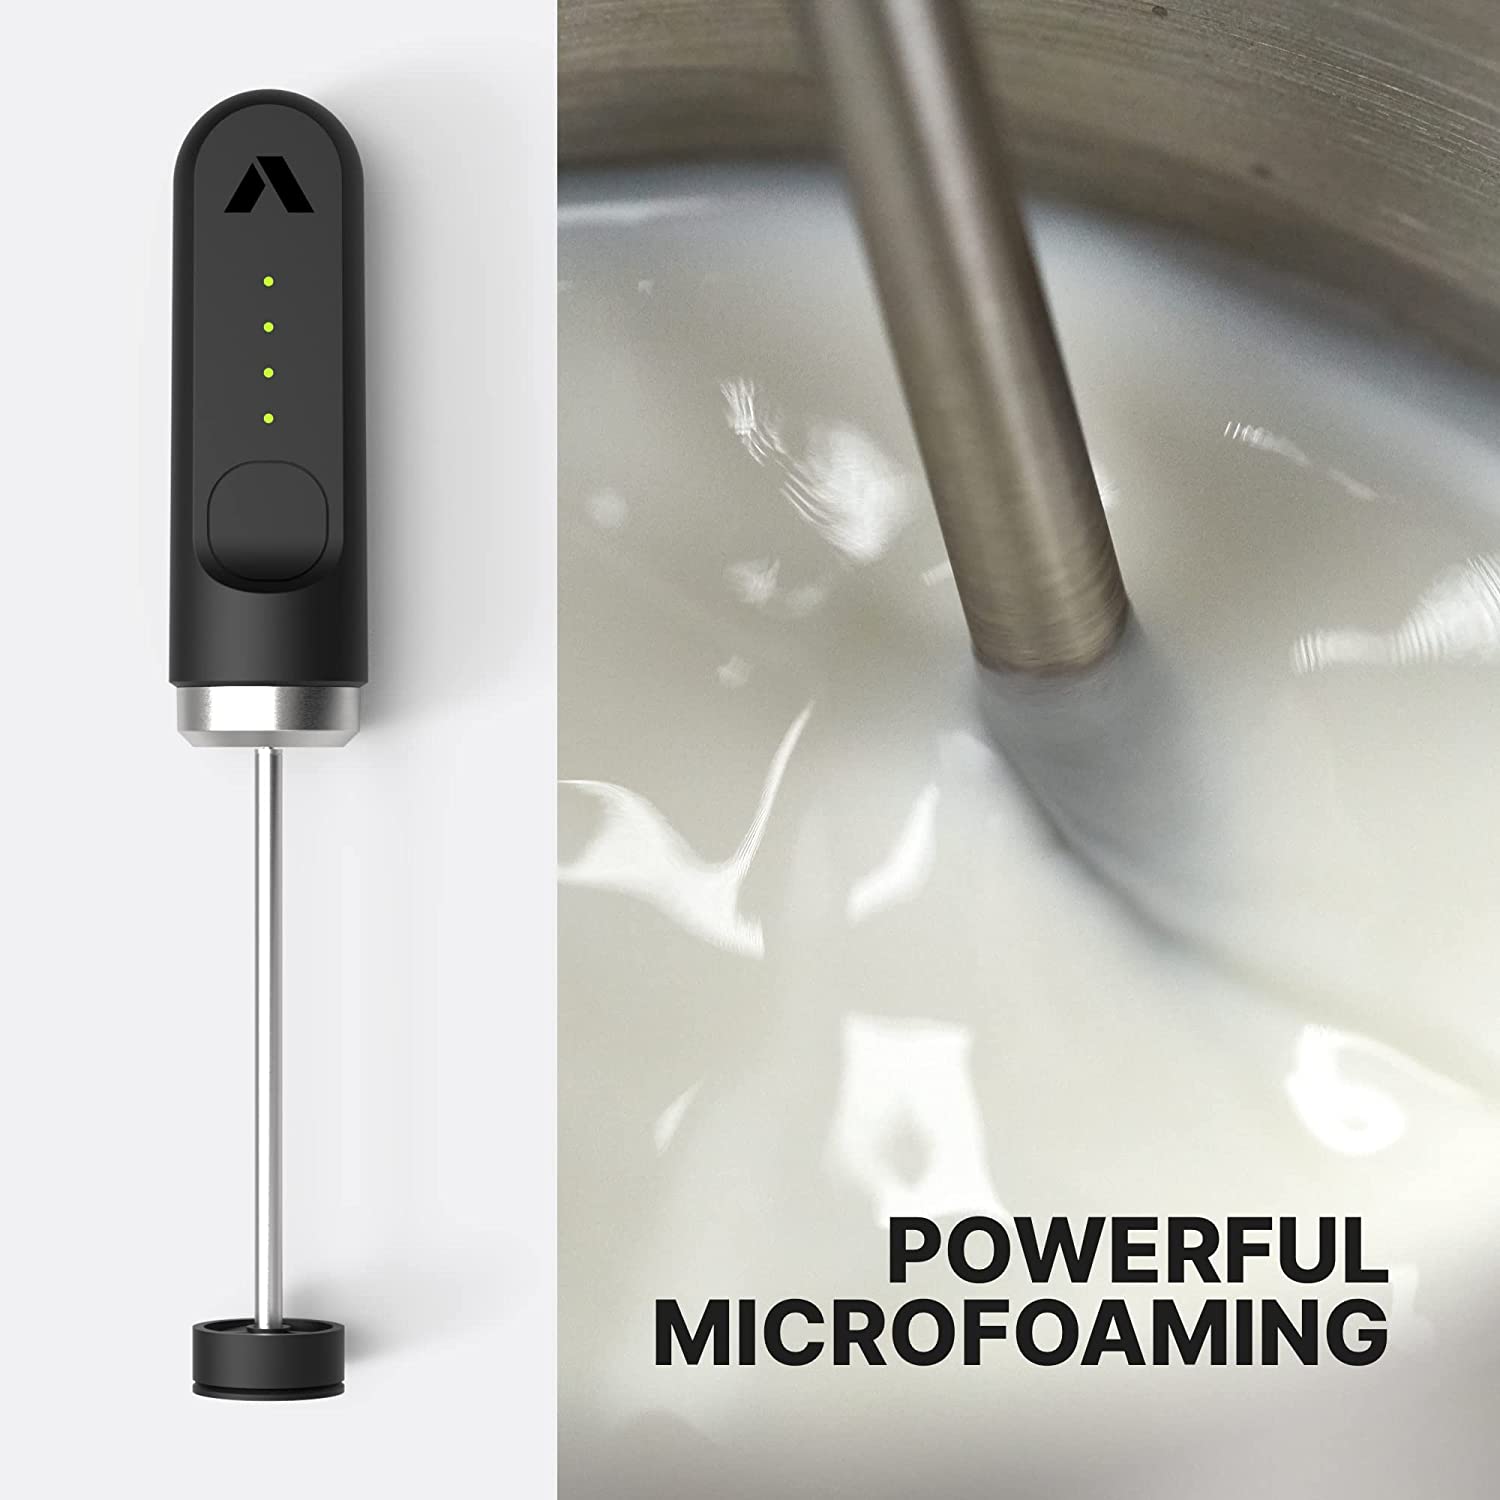 Nanofoamer Lithium Handheld Milk Foamer | Make Premium Barista-Style Coffee Drinks at Home | Rechargeable Foamer for Cappuccino, Latte, Hot Chocolates and More - FoxMart™️ - Subminimal